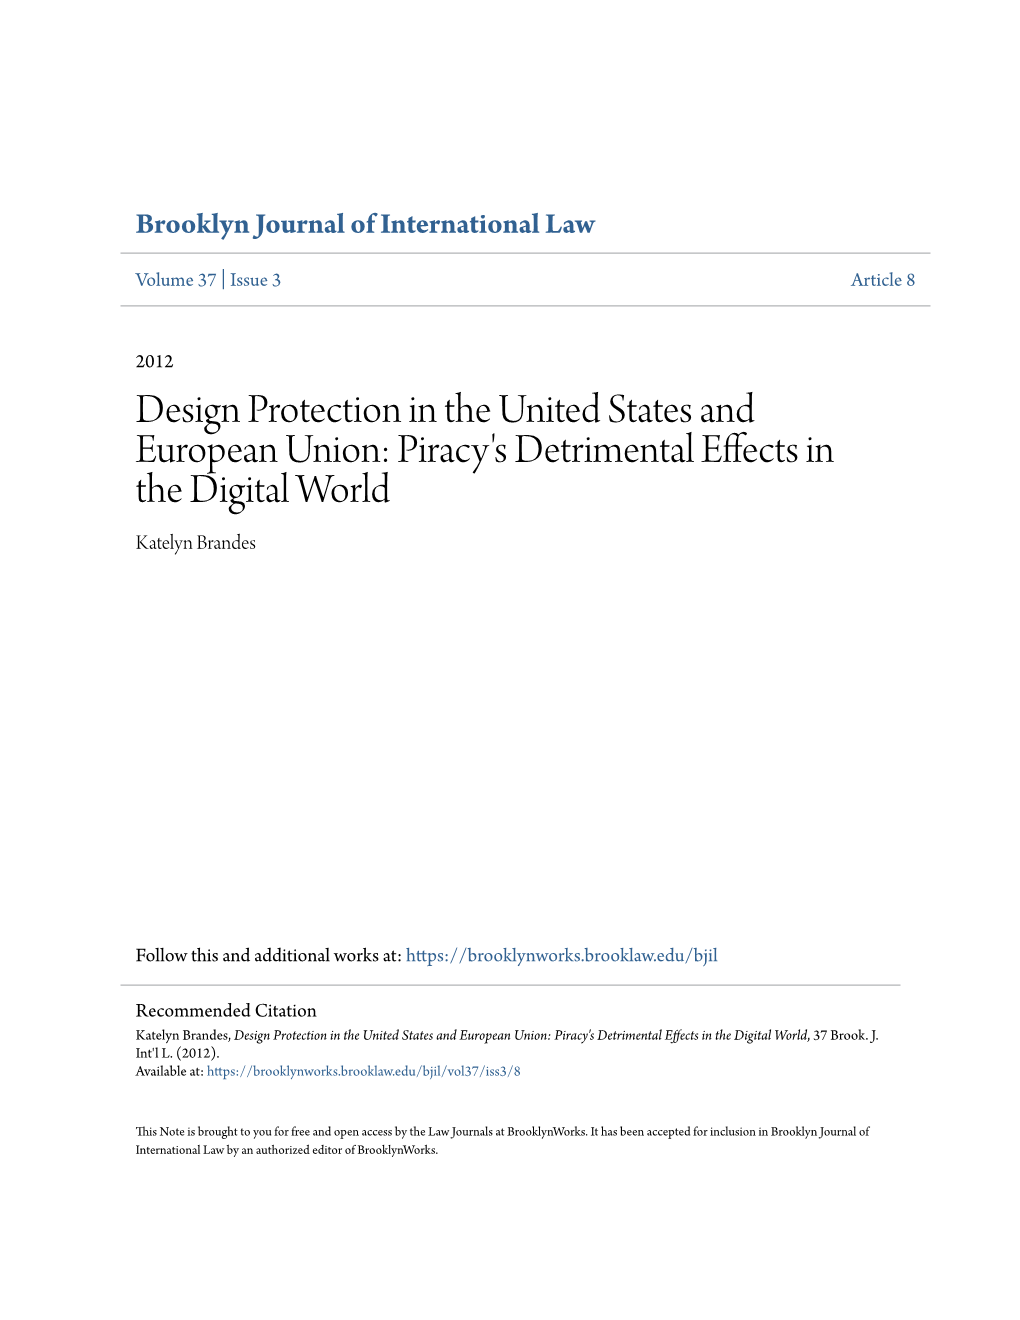 Design Protection in the United States and European Union: Piracy's Detrimental Effects in the Digital World Katelyn Brandes